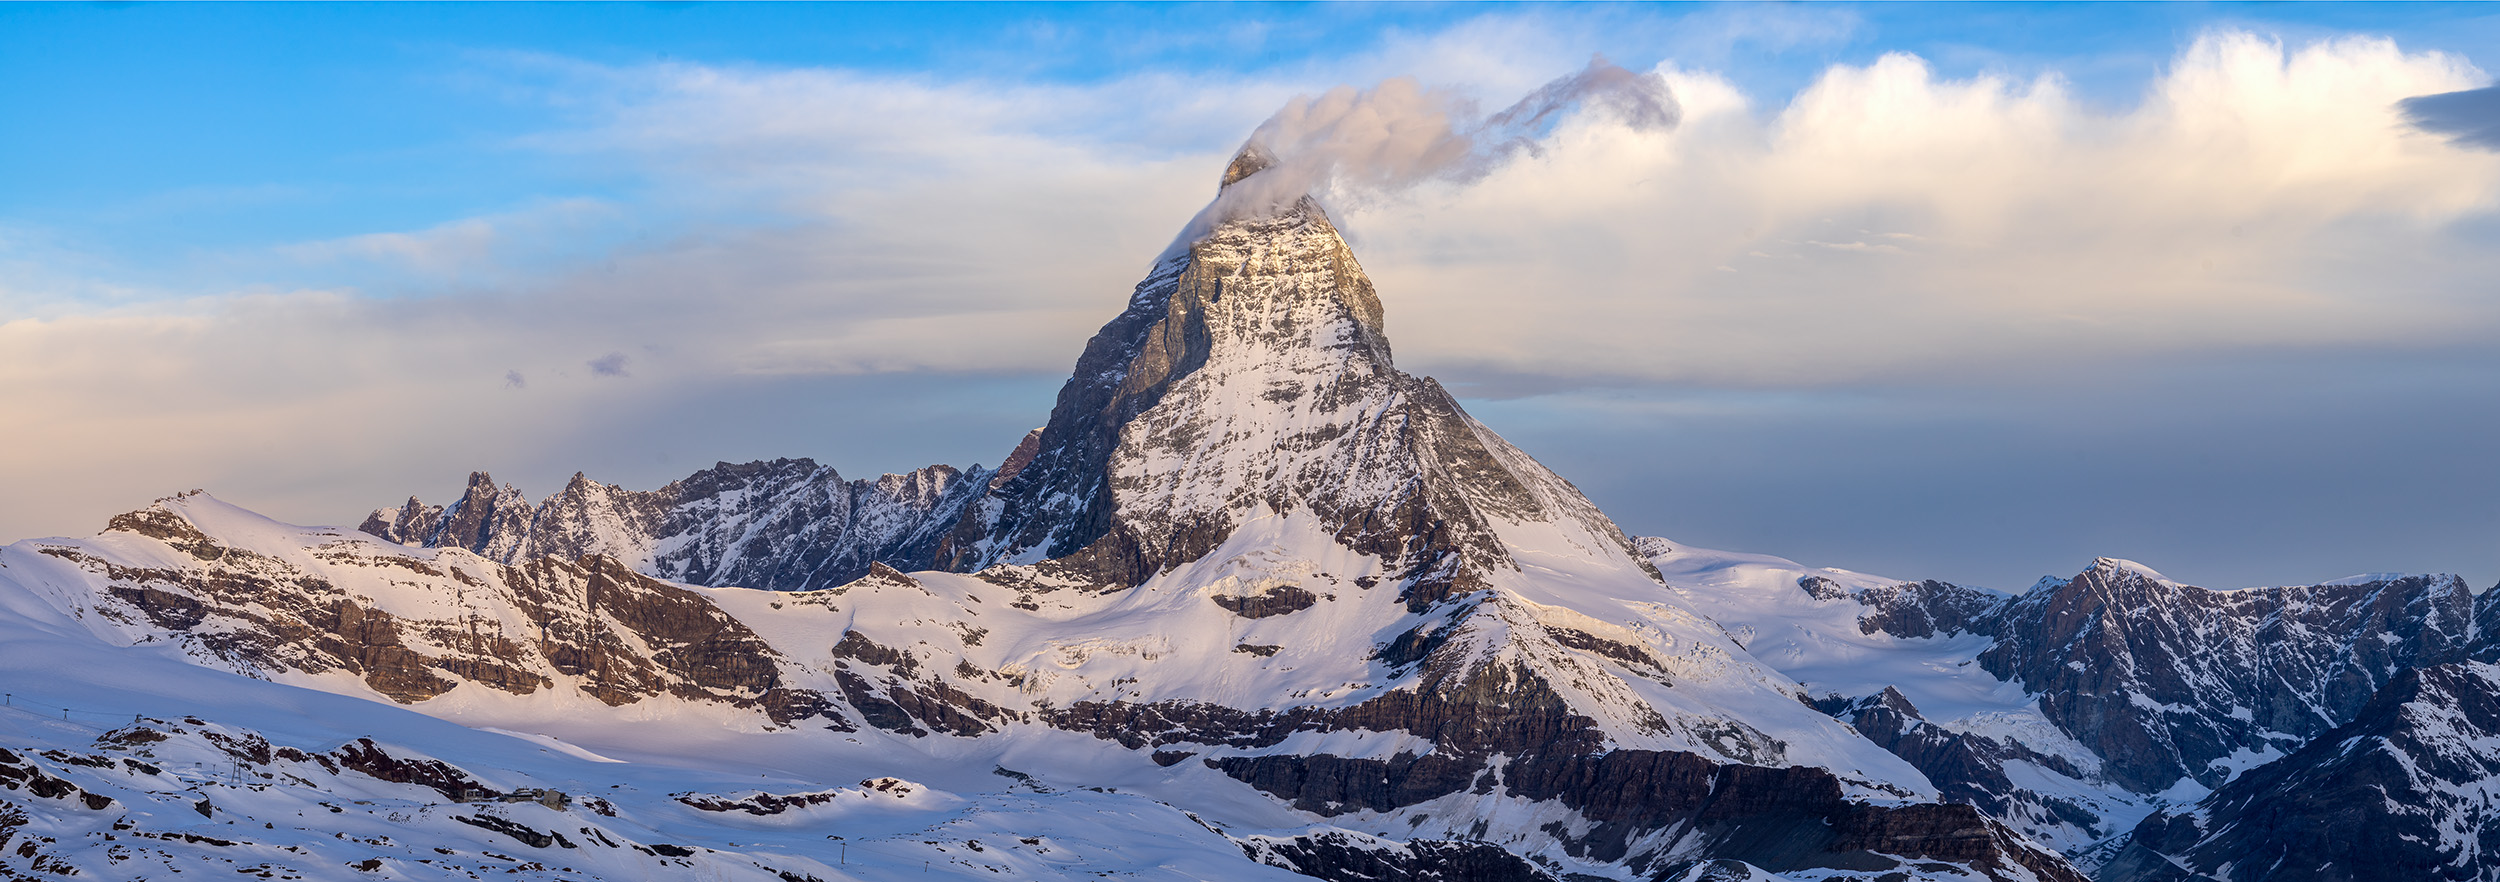 In "Horizon's Embrace," the Matterhorn's iconic silhouette emerges against a canvas of snow and rock, gracefully converging with...